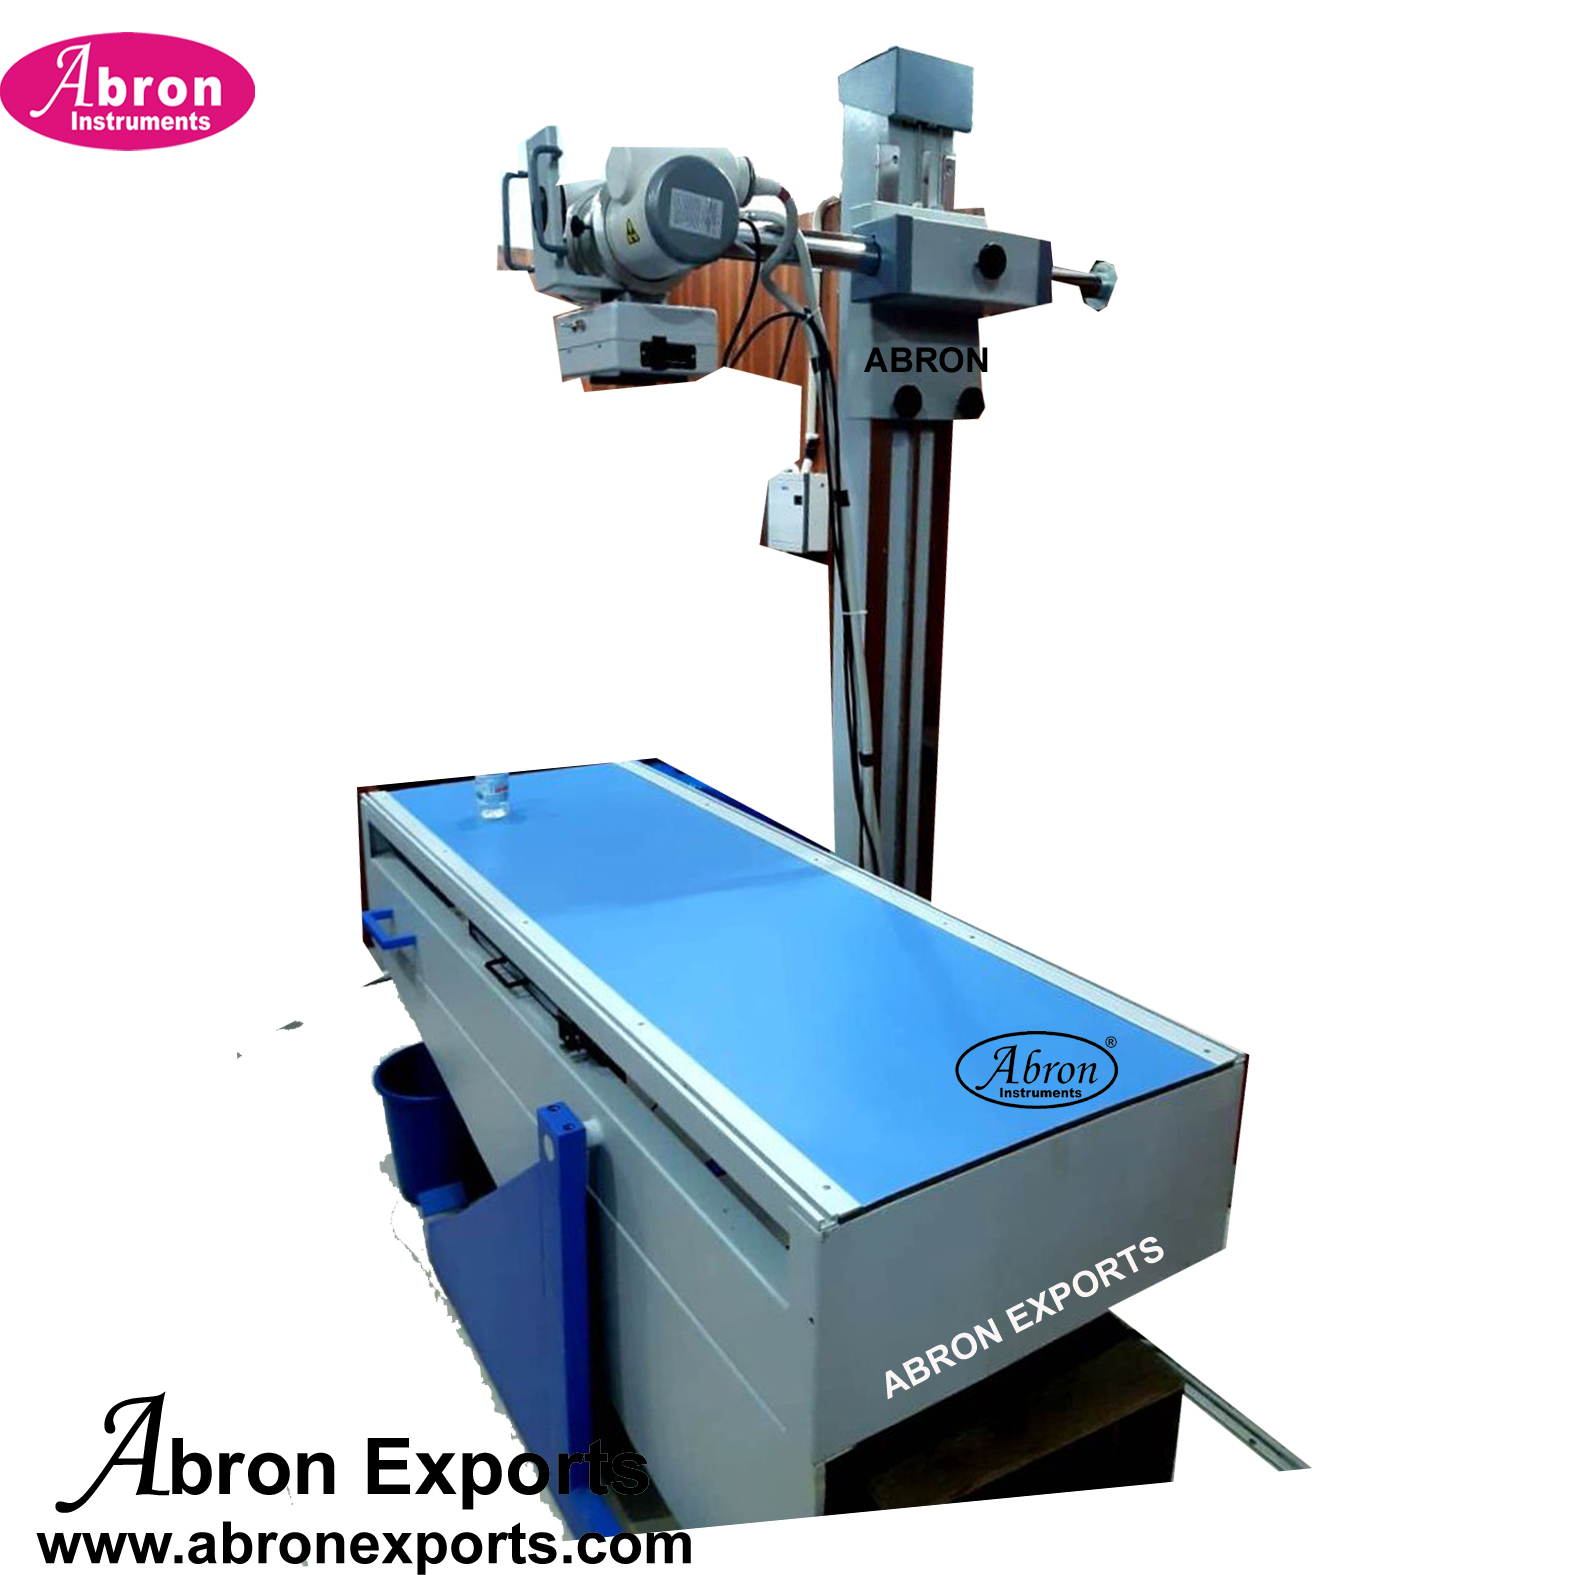 Ortho x-ray machine 300mA fixed with controller and stand platform setup Nursing Home Hospital Abron ABM-2782F3HB 